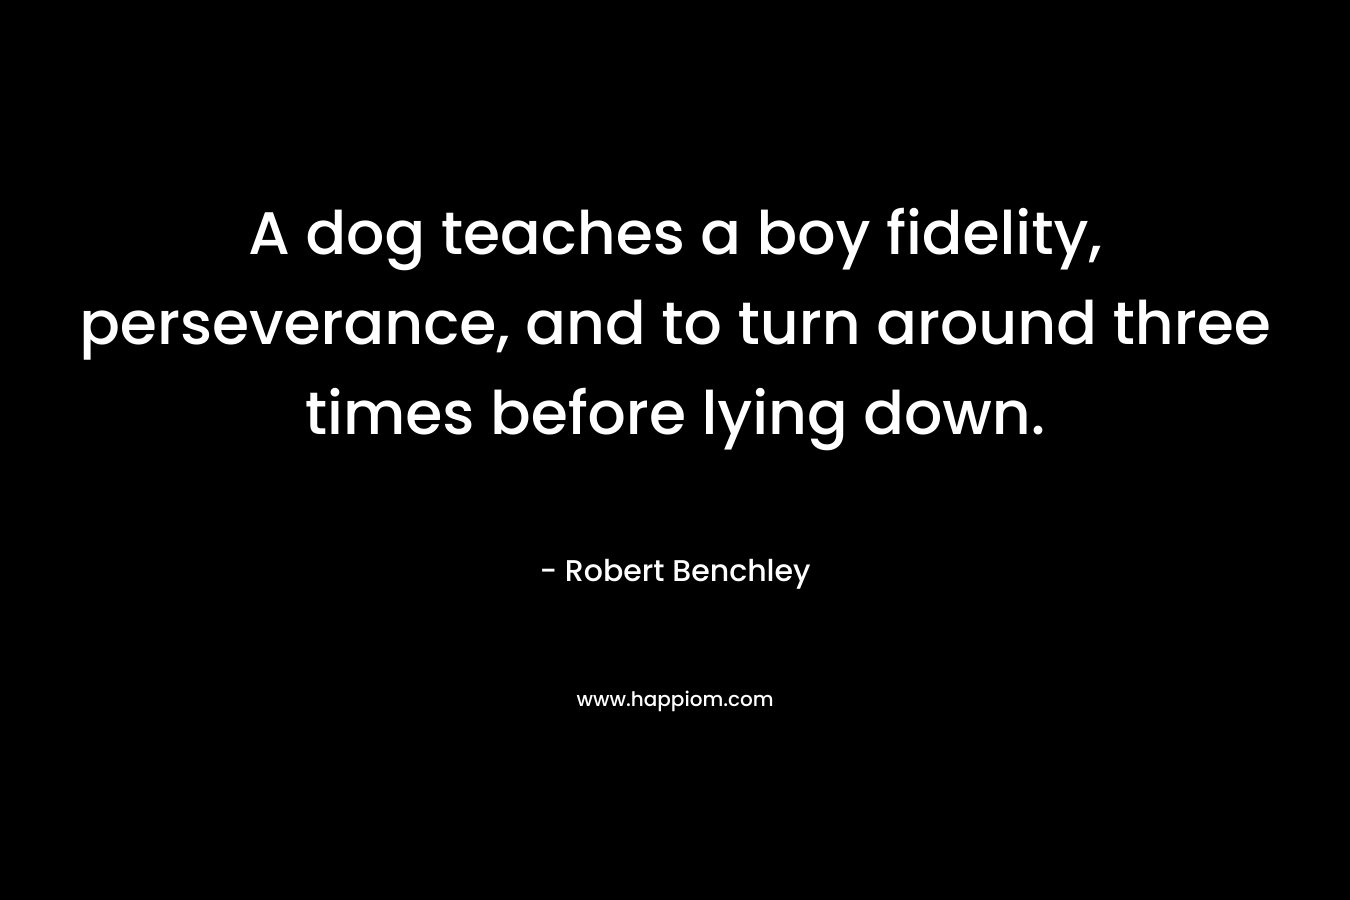 A dog teaches a boy fidelity, perseverance, and to turn around three times before lying down. – Robert Benchley